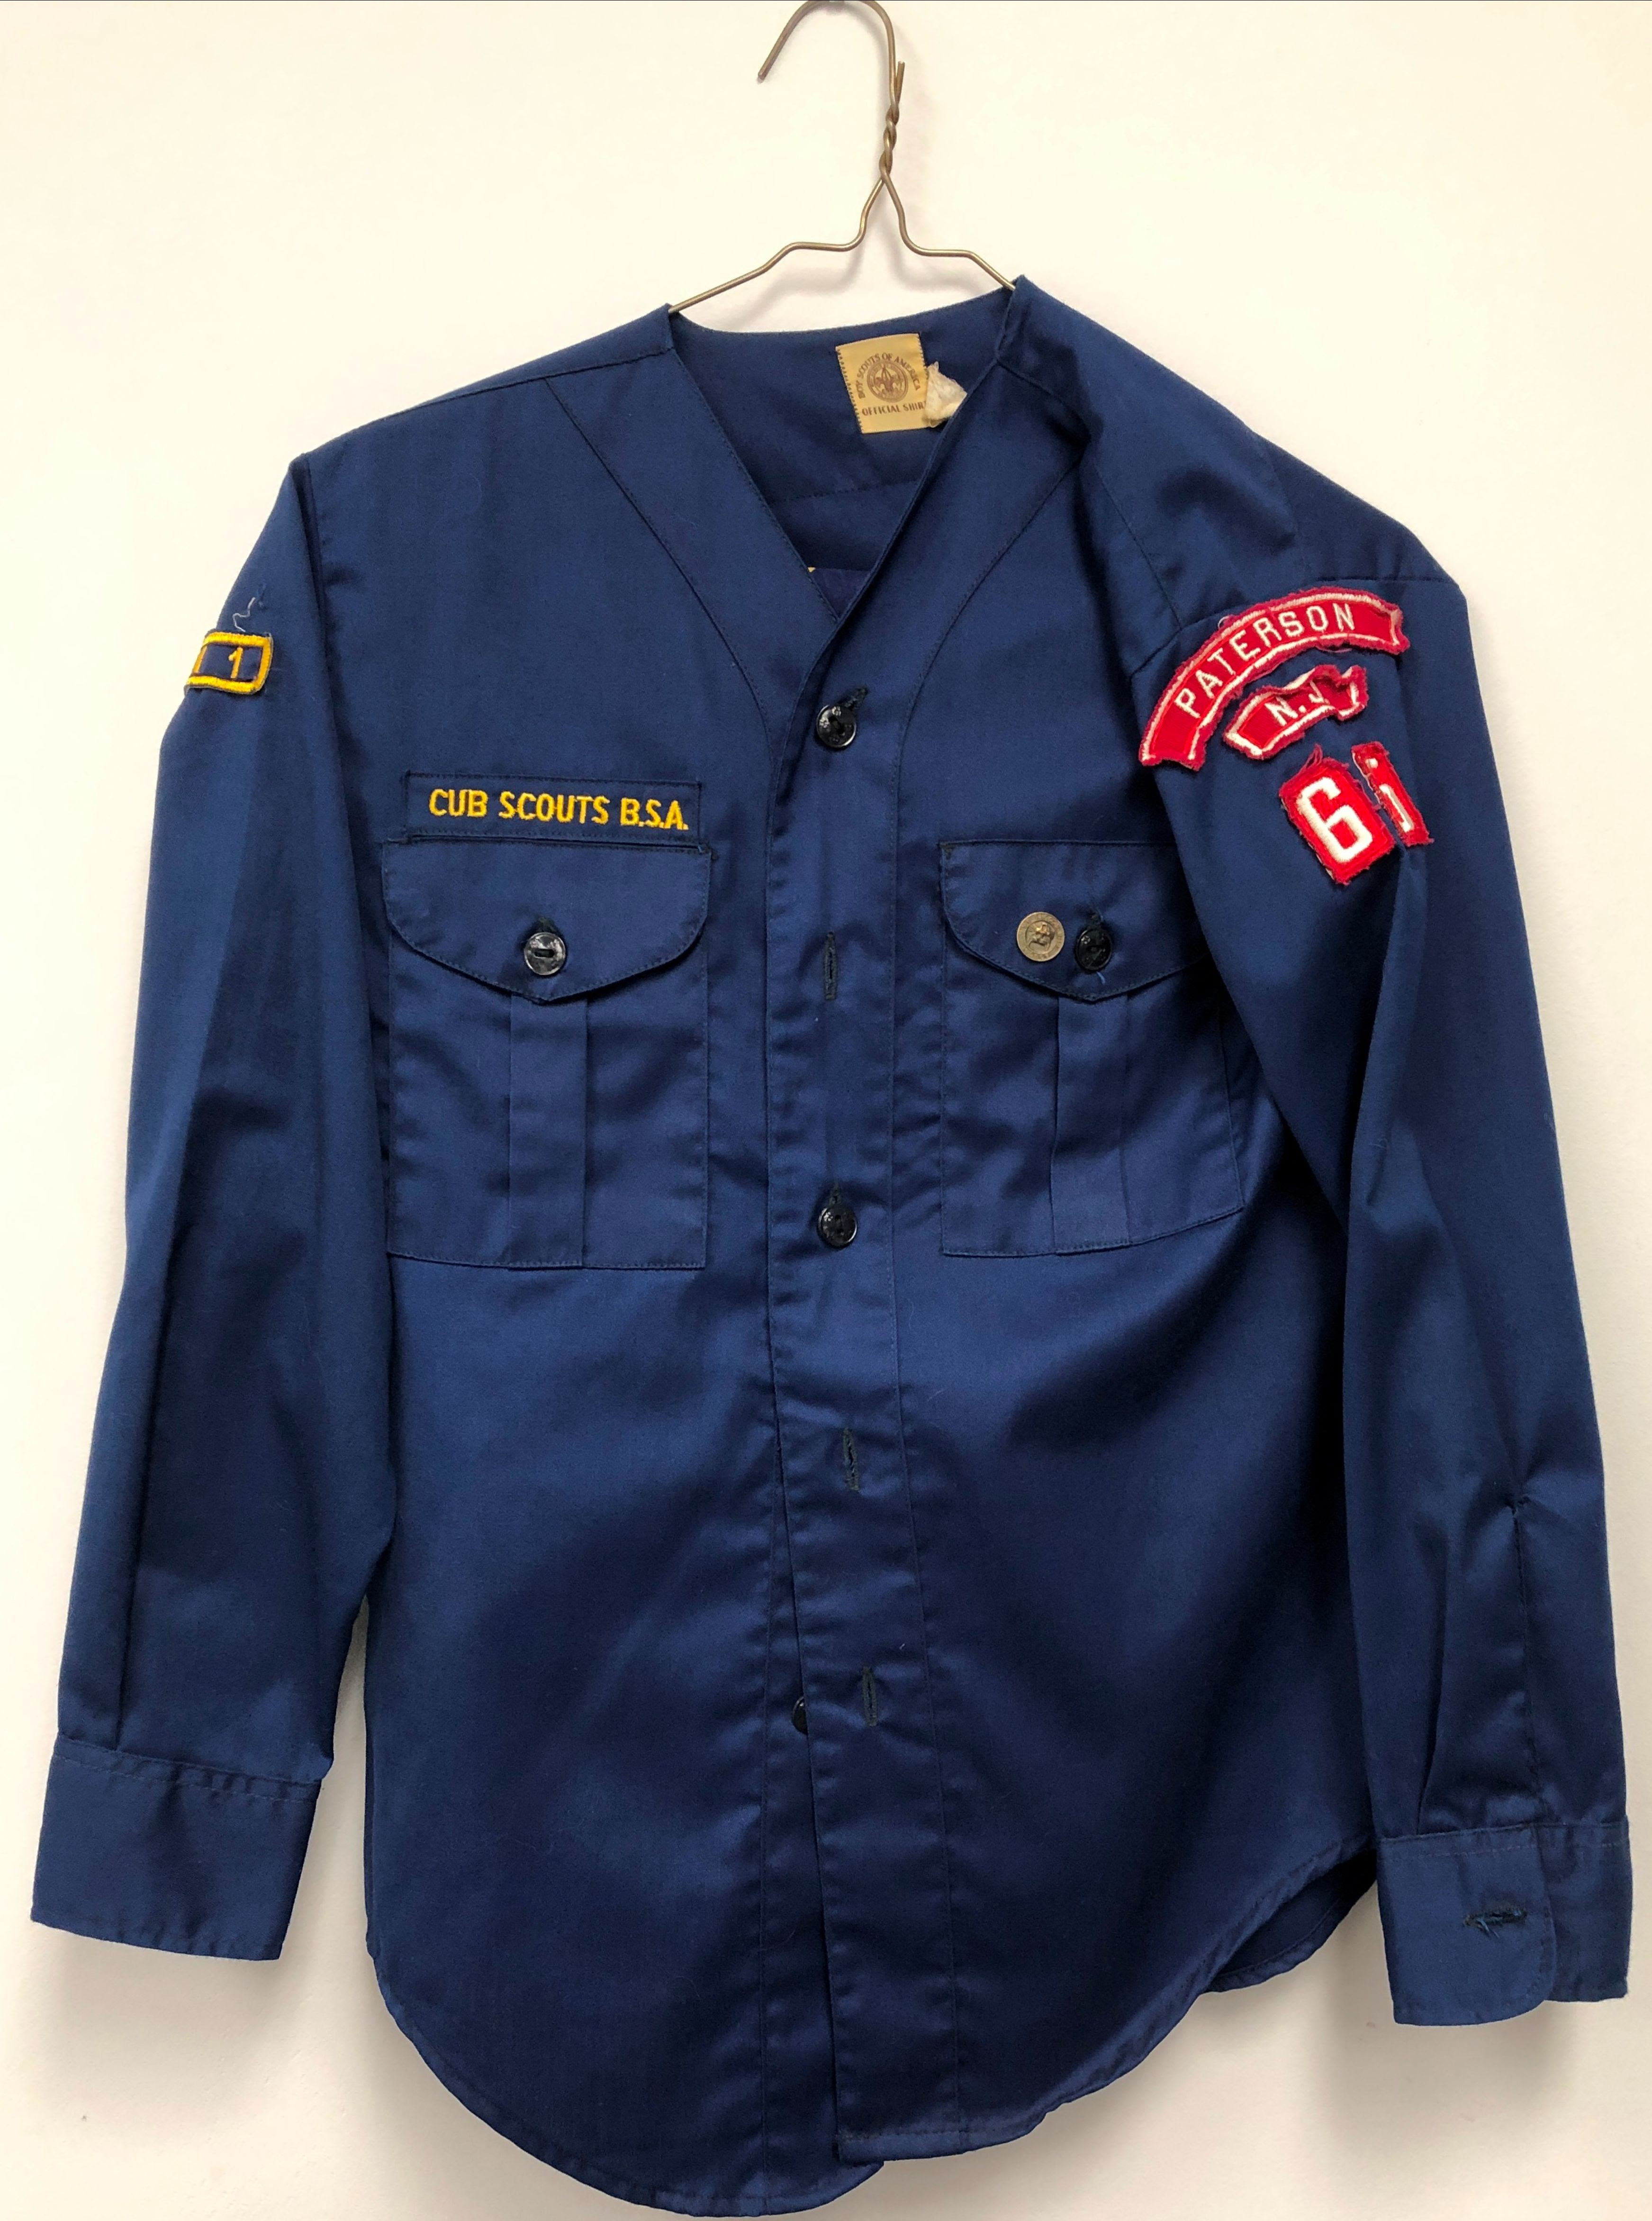 Paterson Cub Scouts Troop 65 shirt donated by Steve Verp.